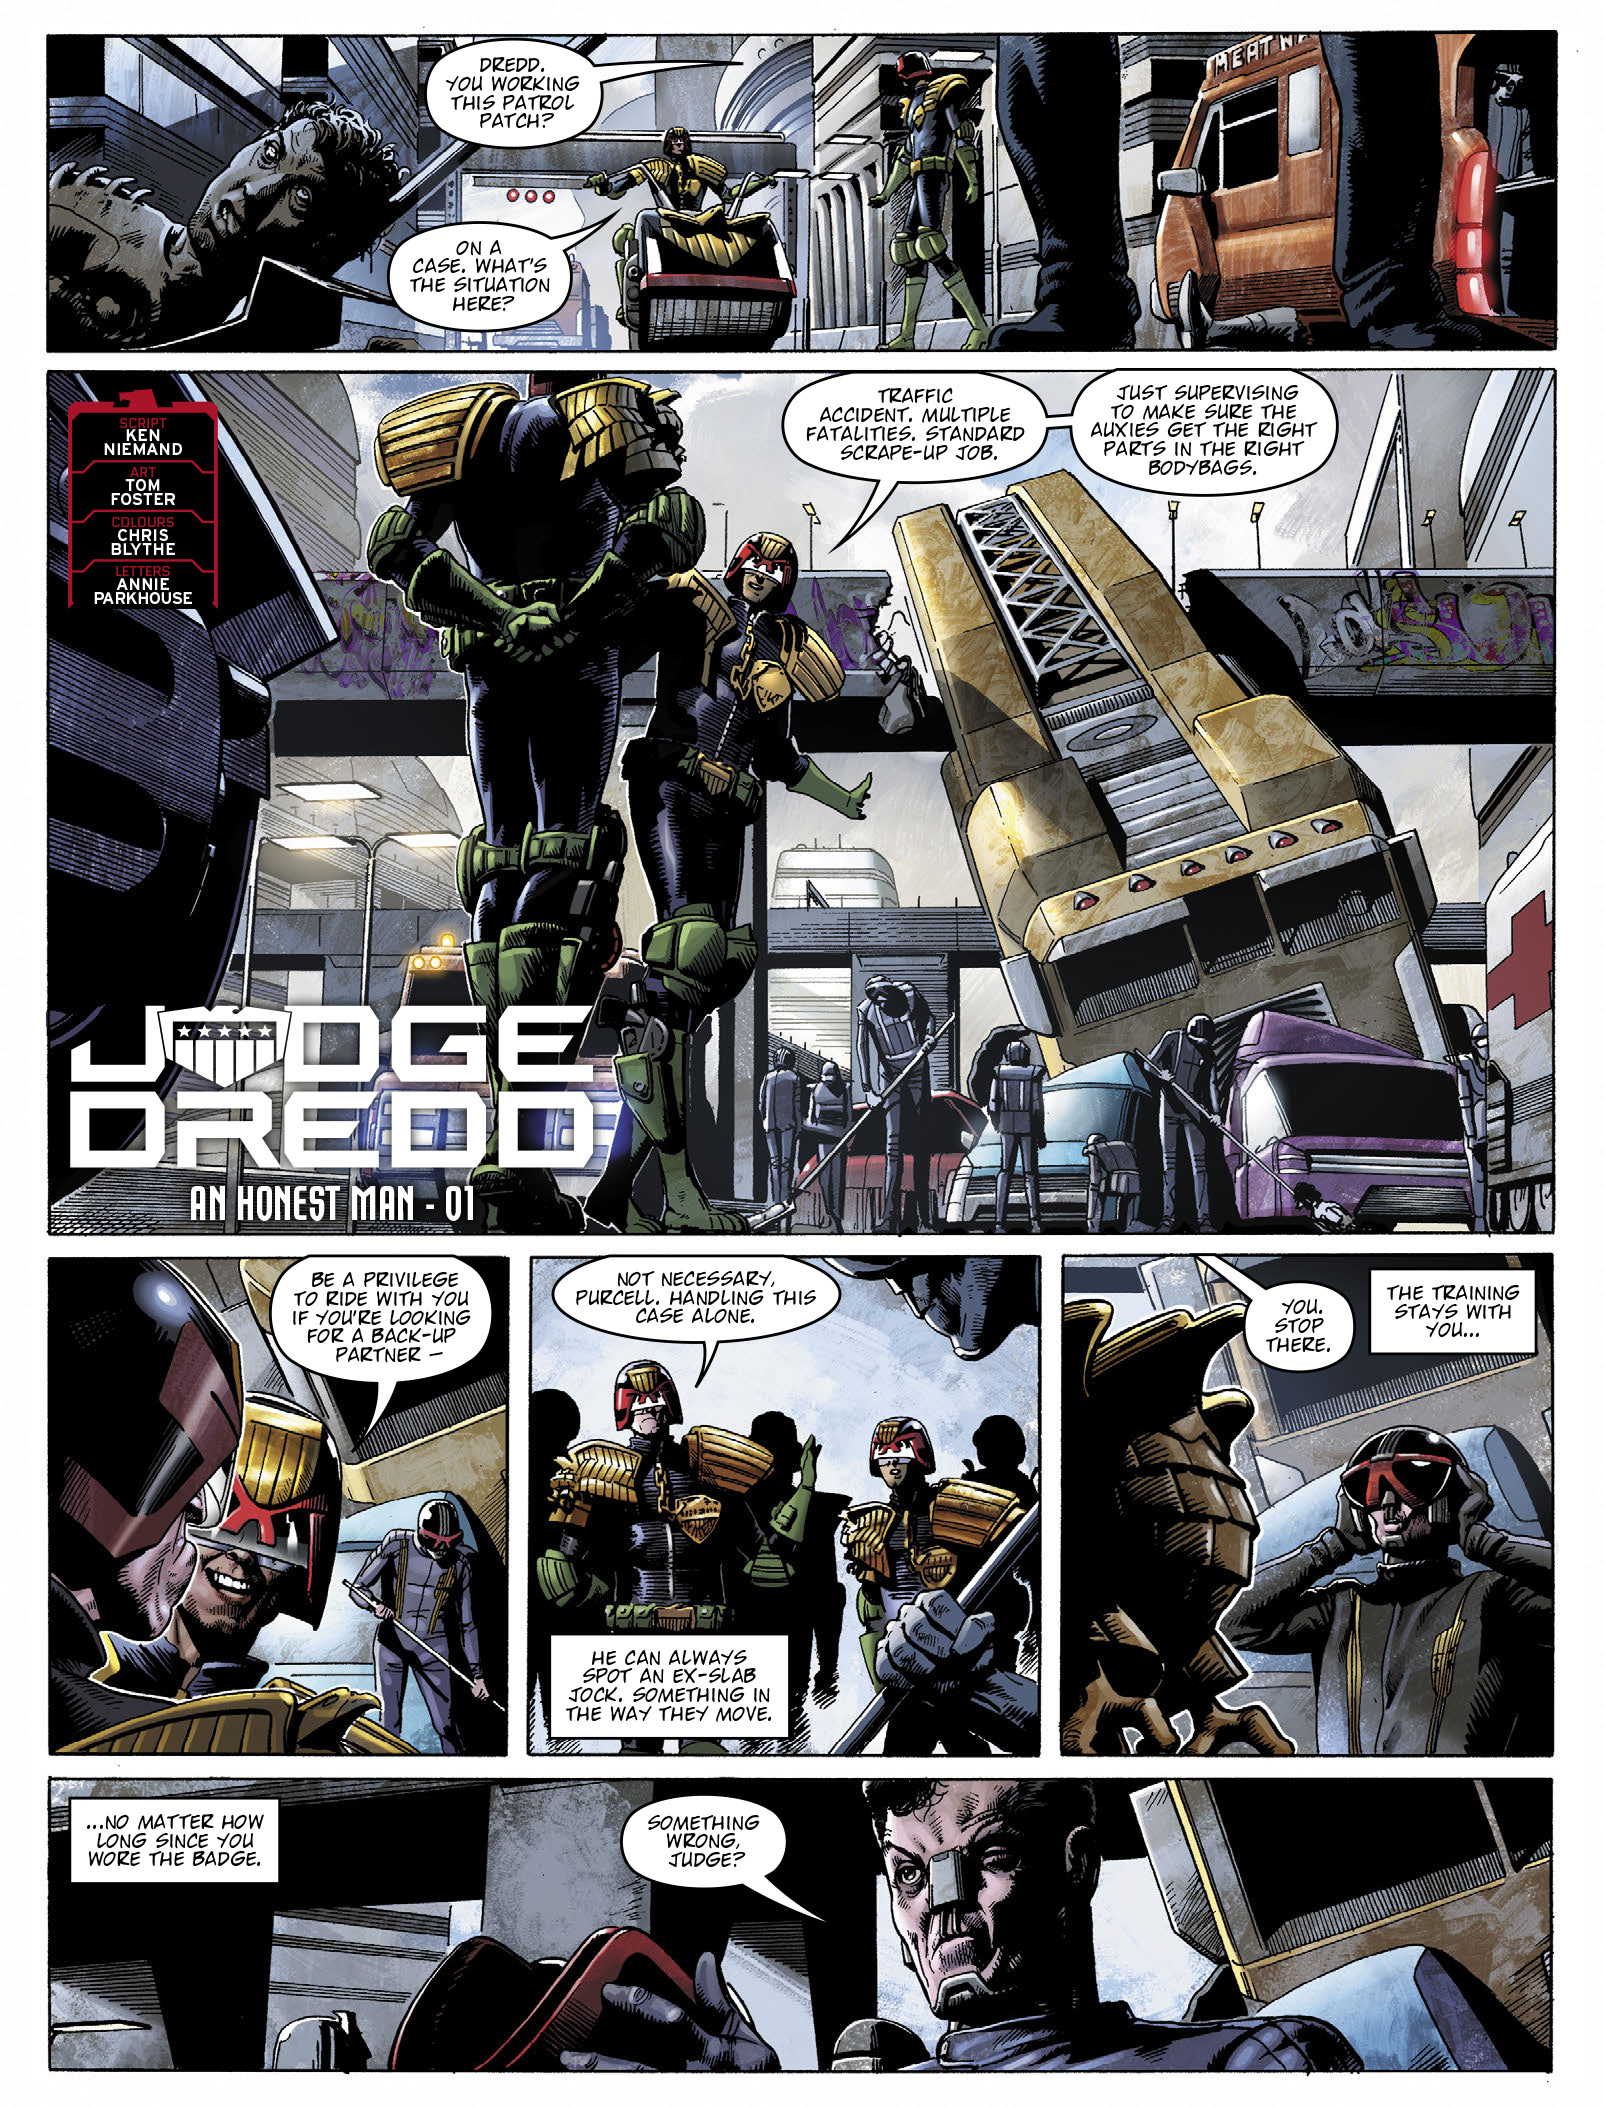 2000 AD: Chapter 2281 - Page 3